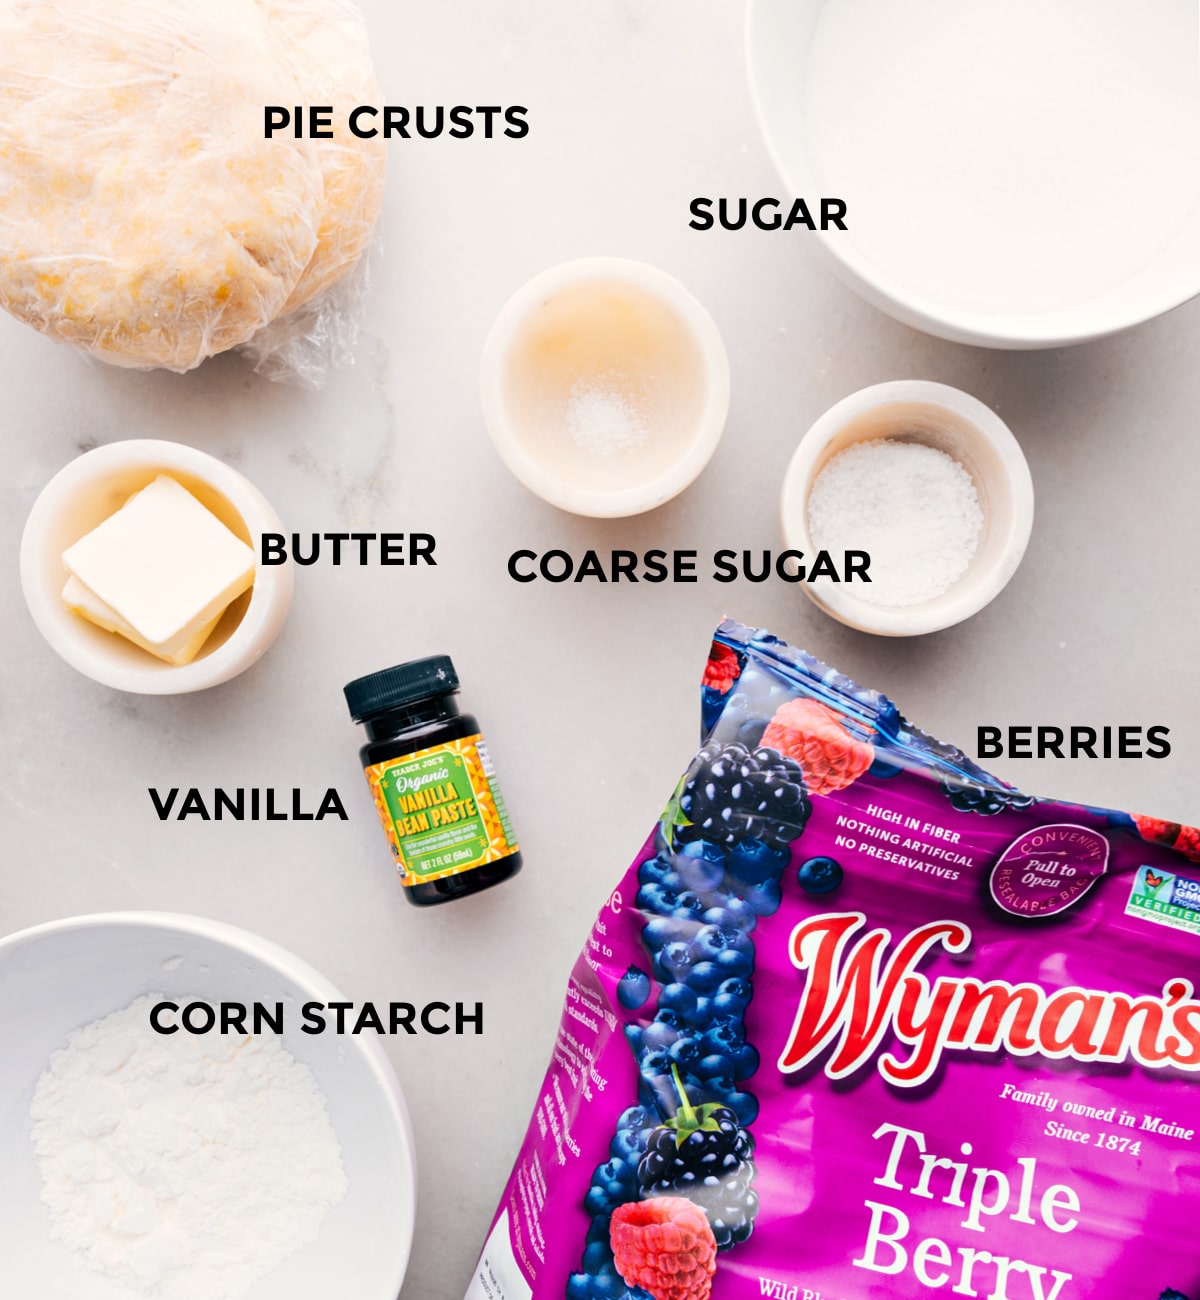 All the ingredients laid out on a board for this delicious dessert.